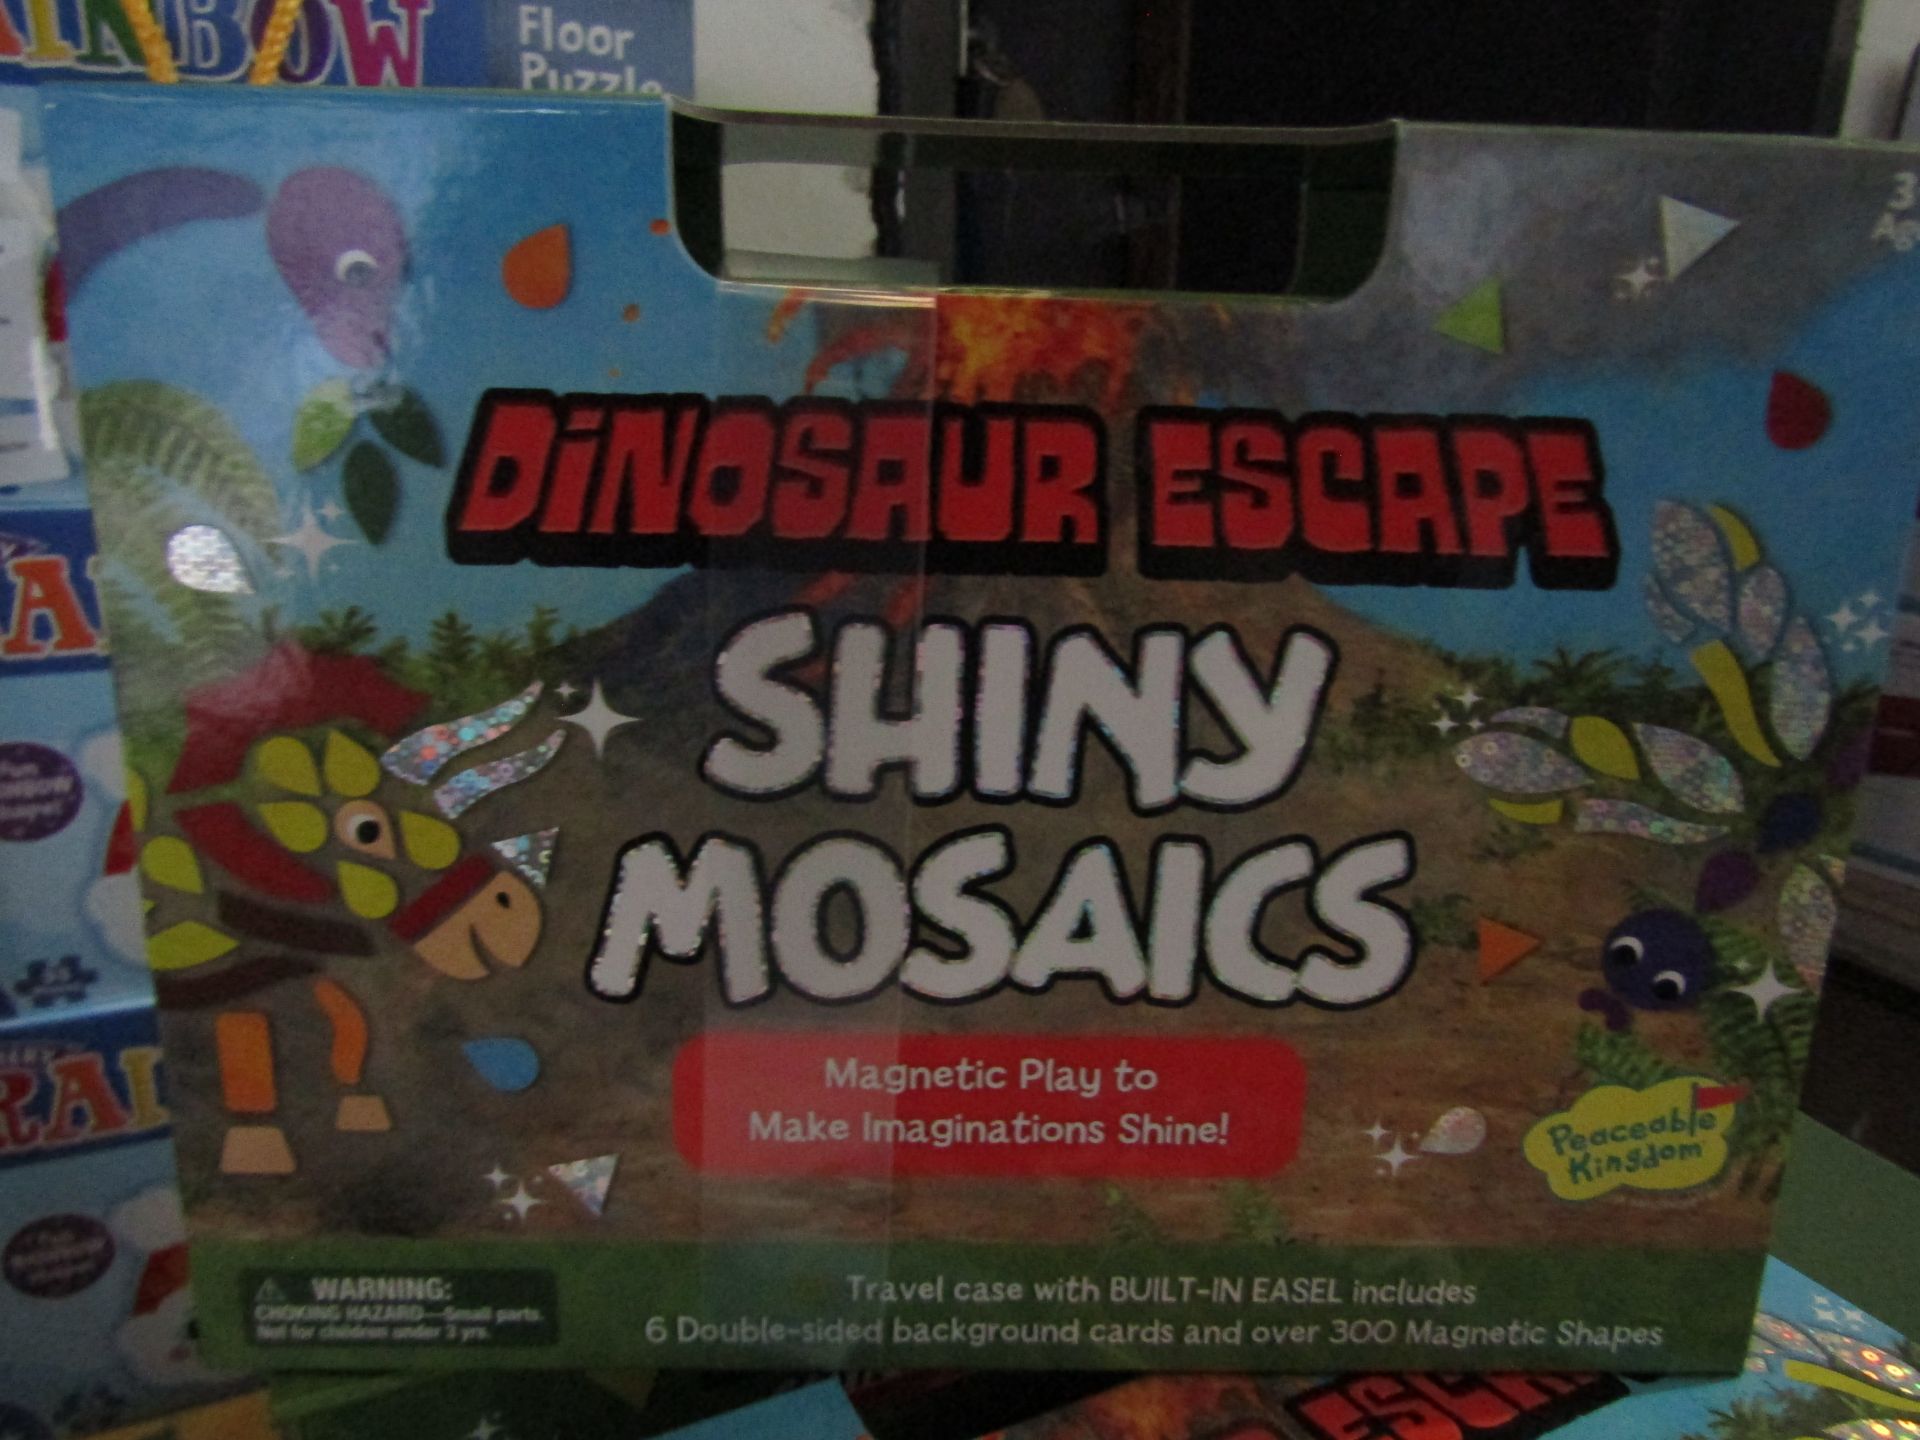 Dinosaur Escape Shiny Mosaics Built-in-Easel 6 Doubl Sided Background Cards & Over 300 Magnetic